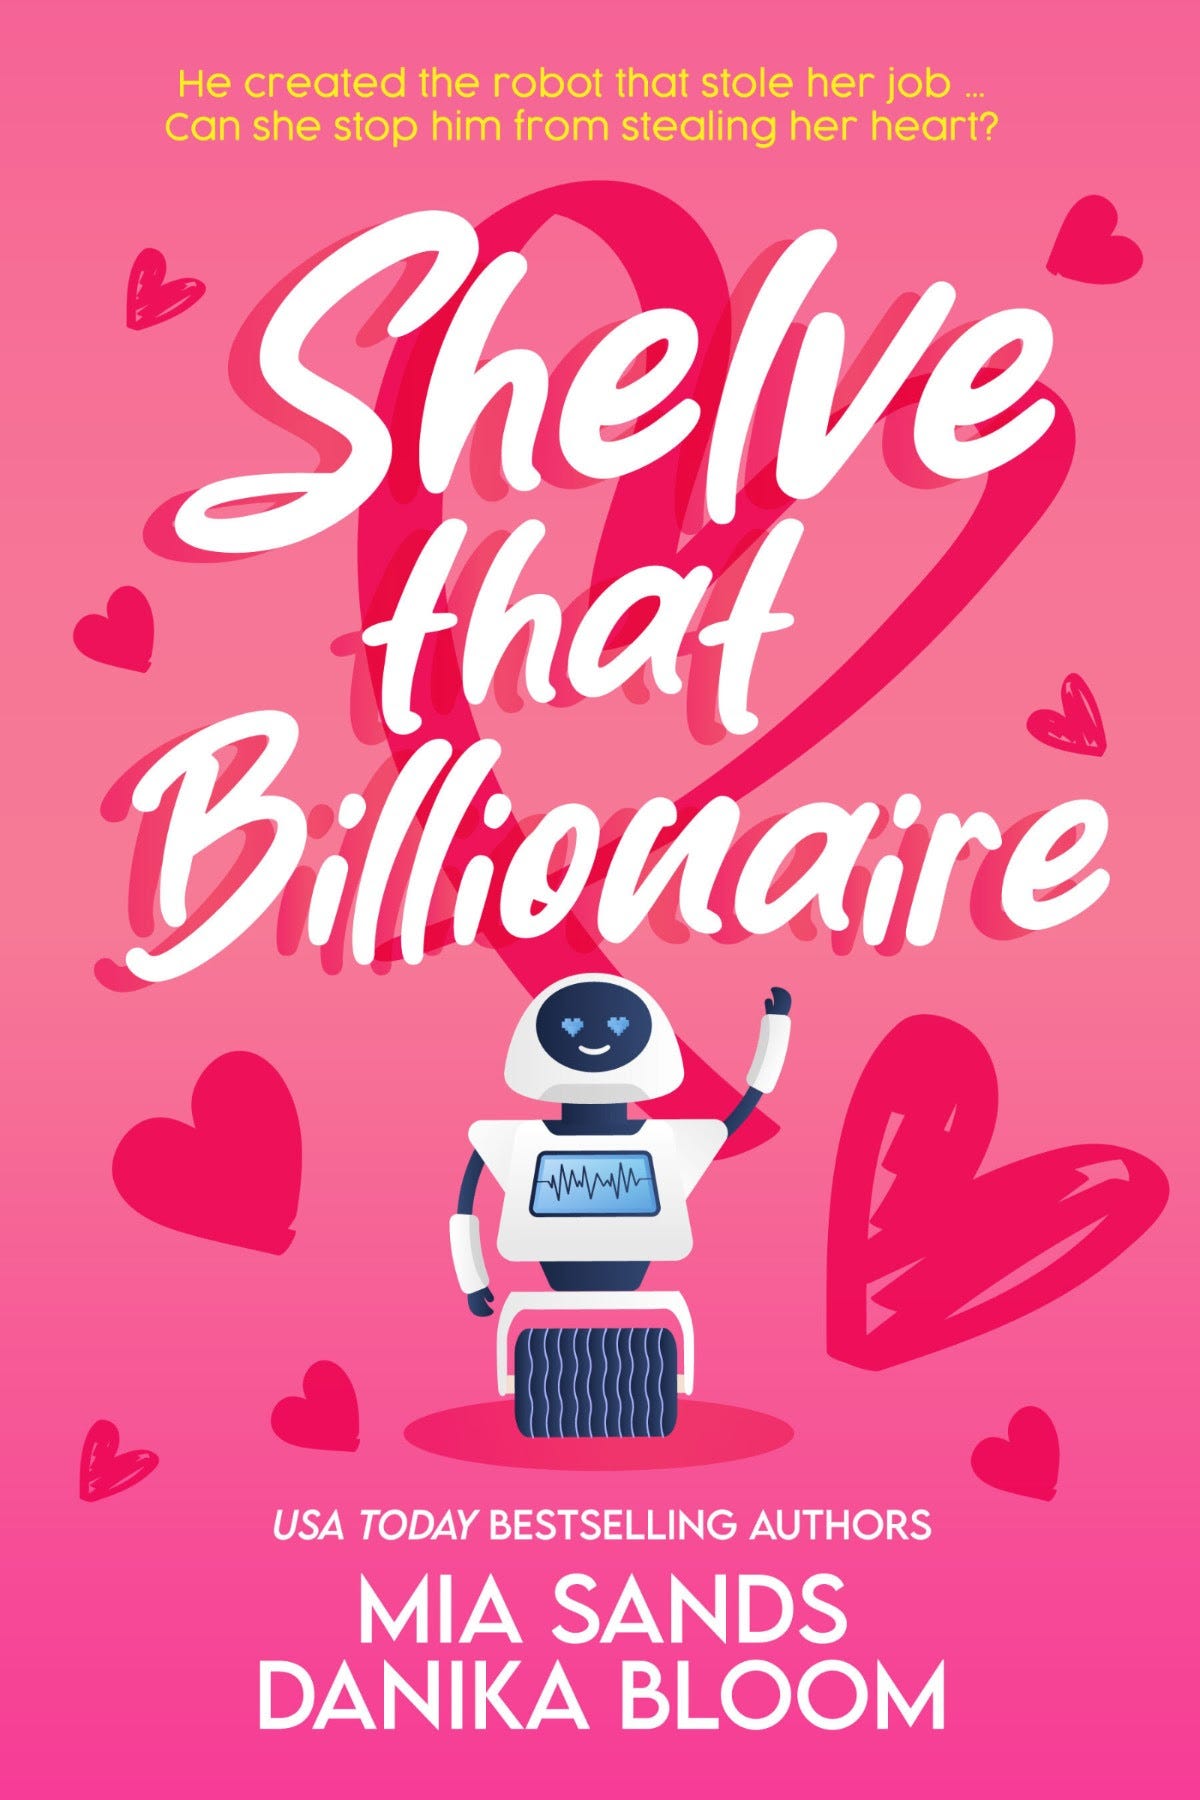 Book cover for "Shelve That Billionaire" by Mia Sands and Danika Bloom, featuring a cartoon robot, with hearts in the background on a pink backdrop.